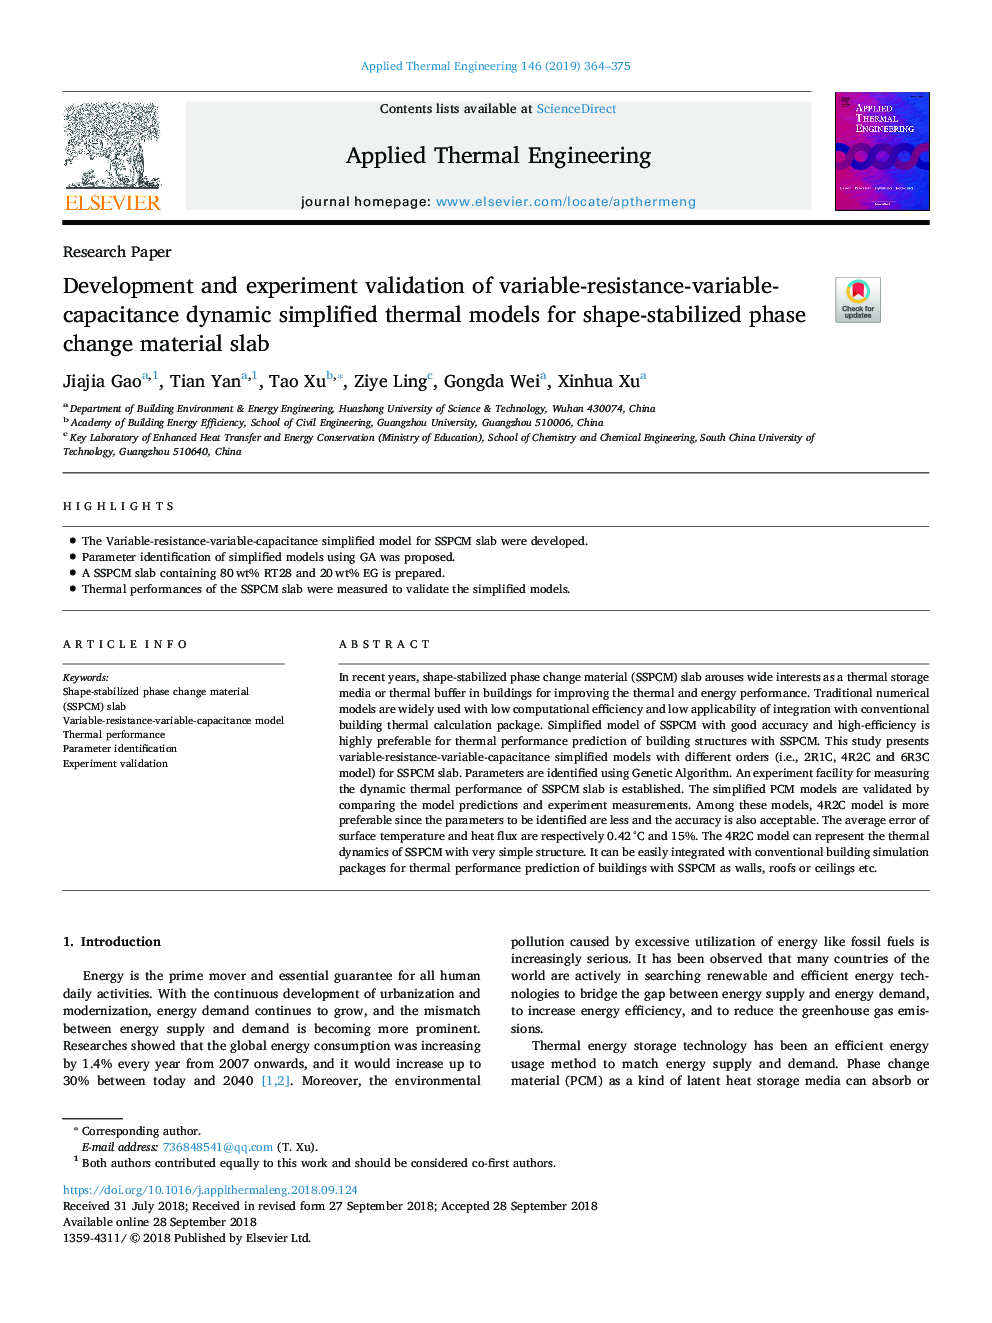 Development and experiment validation of variable-resistance-variable-capacitance dynamic simplified thermal models for shape-stabilized phase change material slab